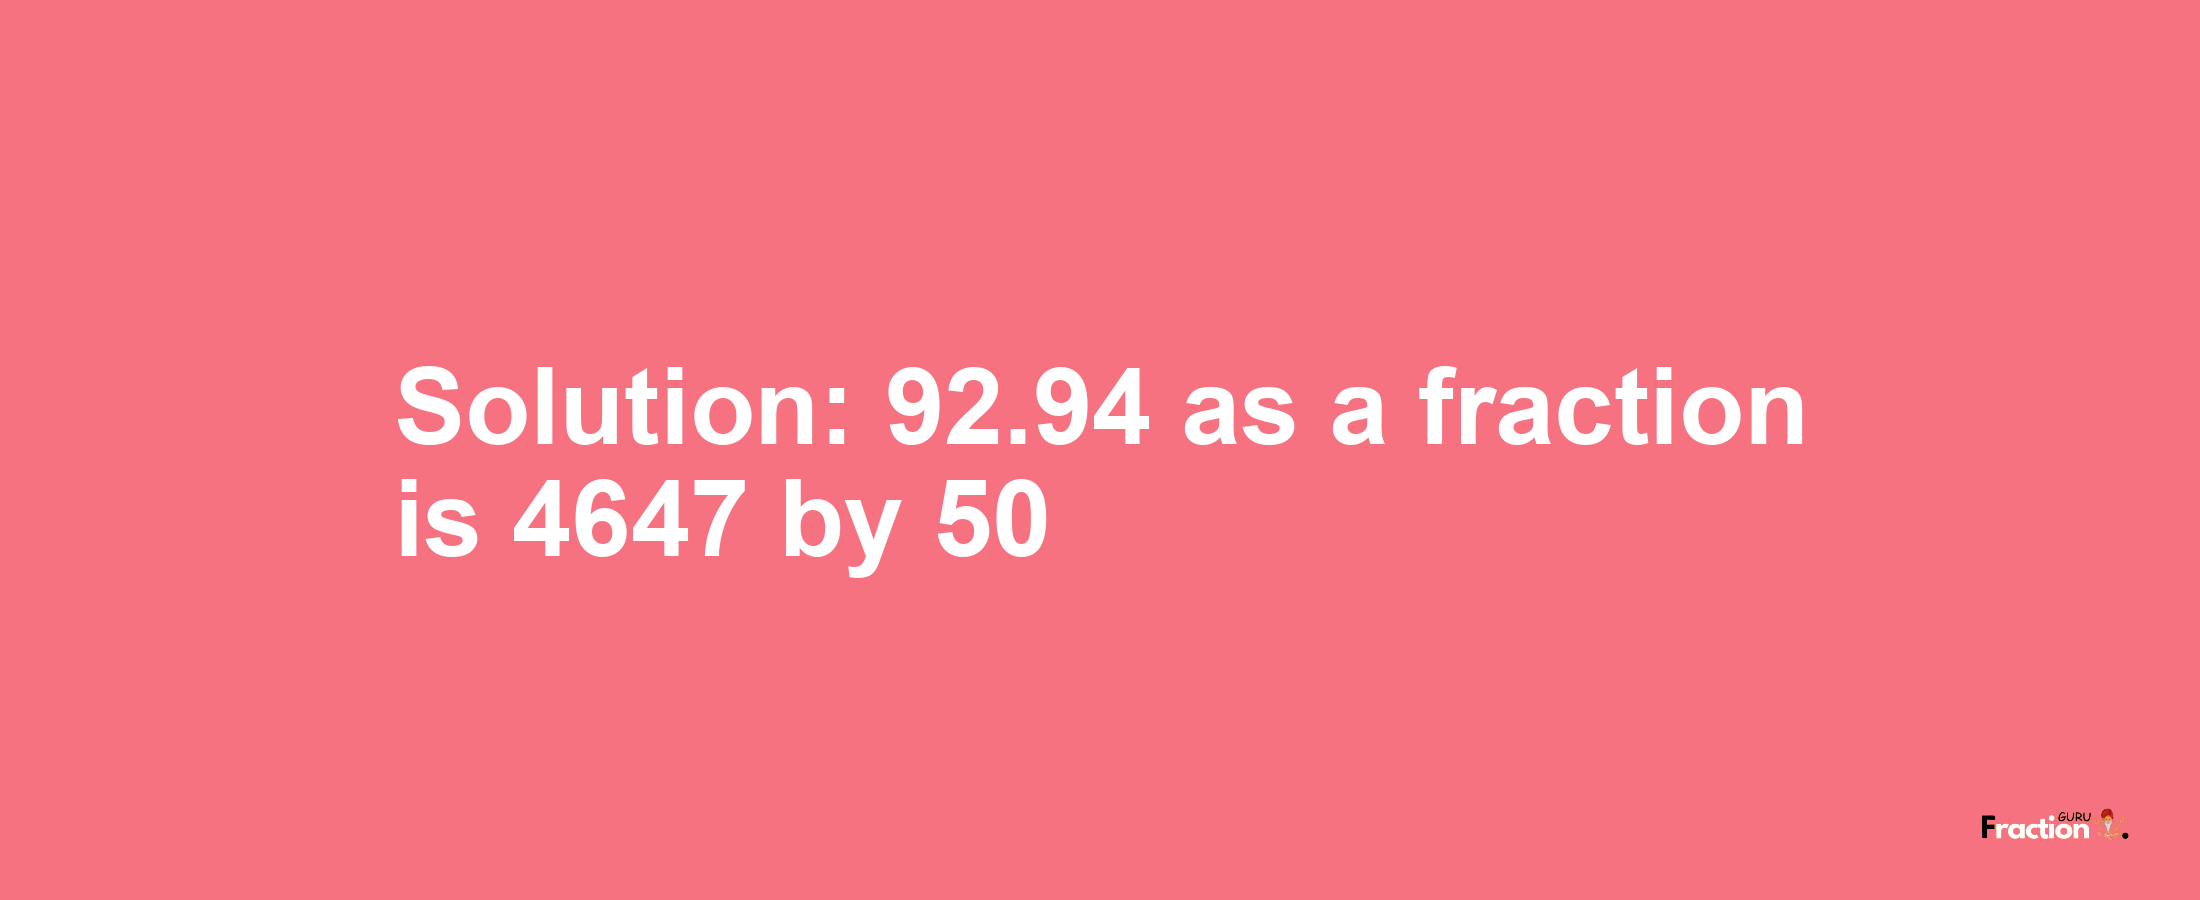 Solution:92.94 as a fraction is 4647/50